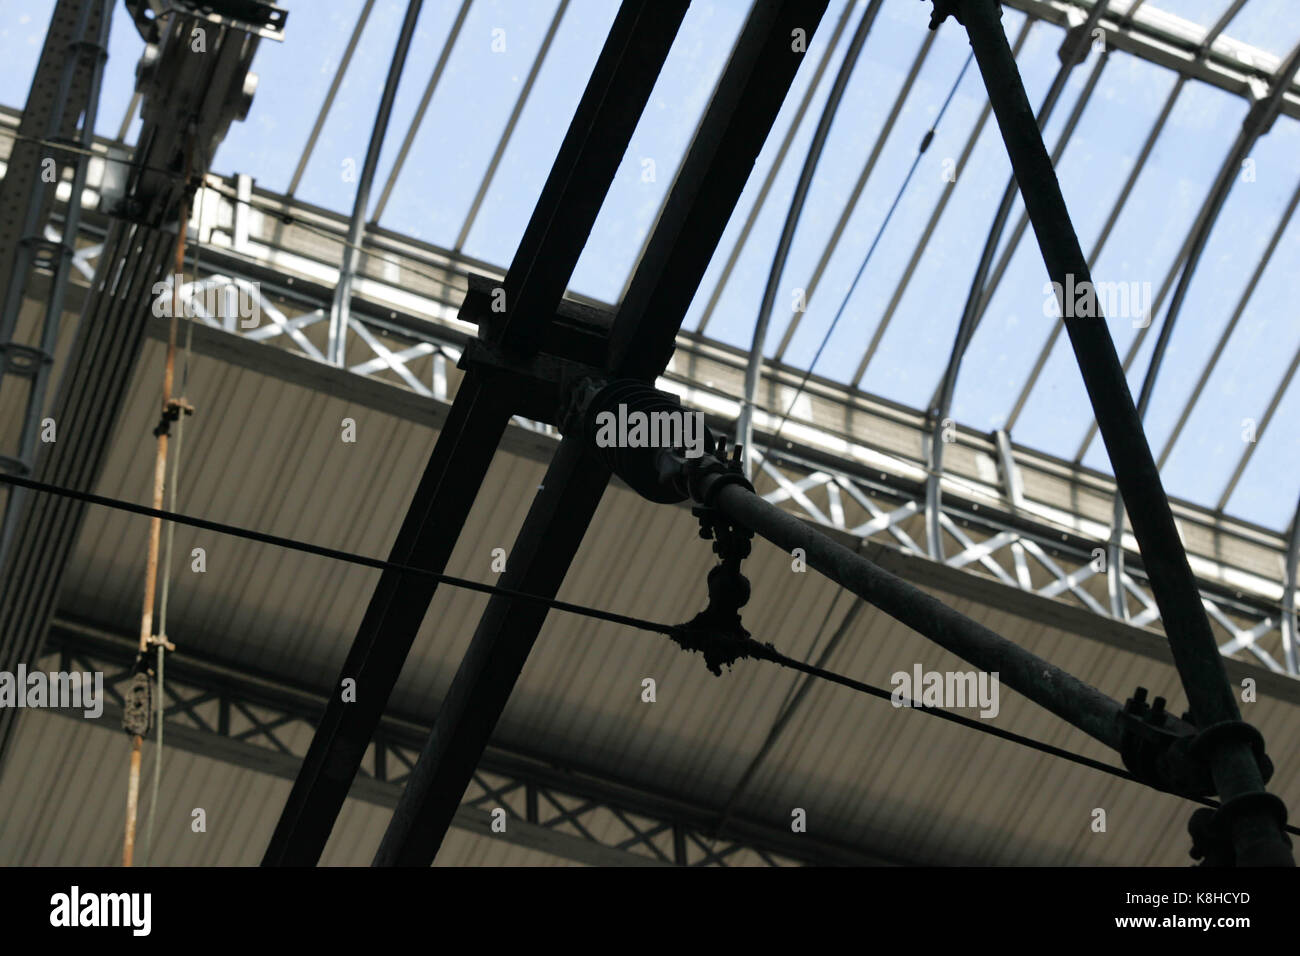 Liverpool Lime street station Foto Stock